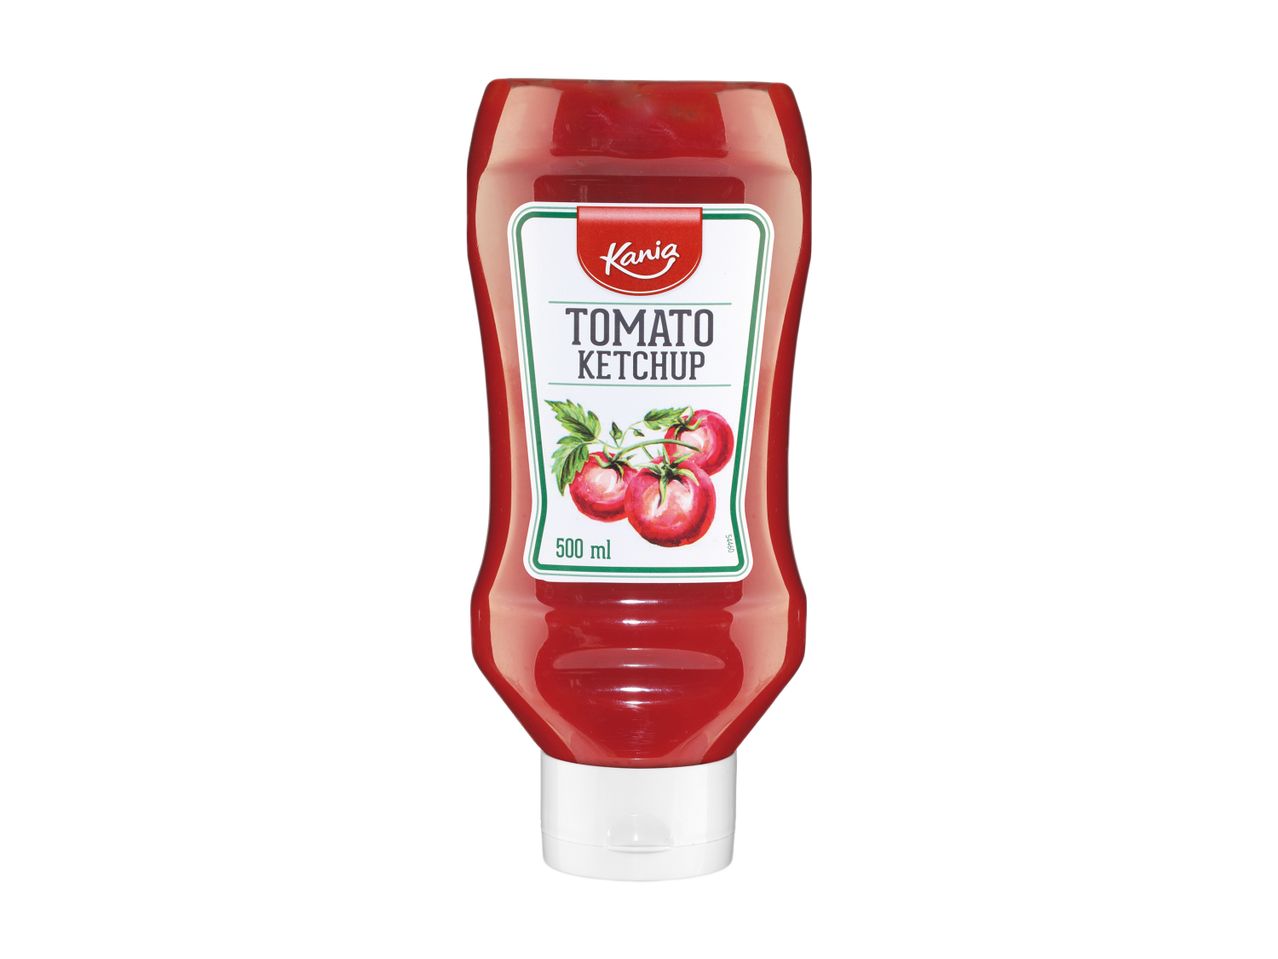 Go to full screen view: Tomato Ketchup - Image 1